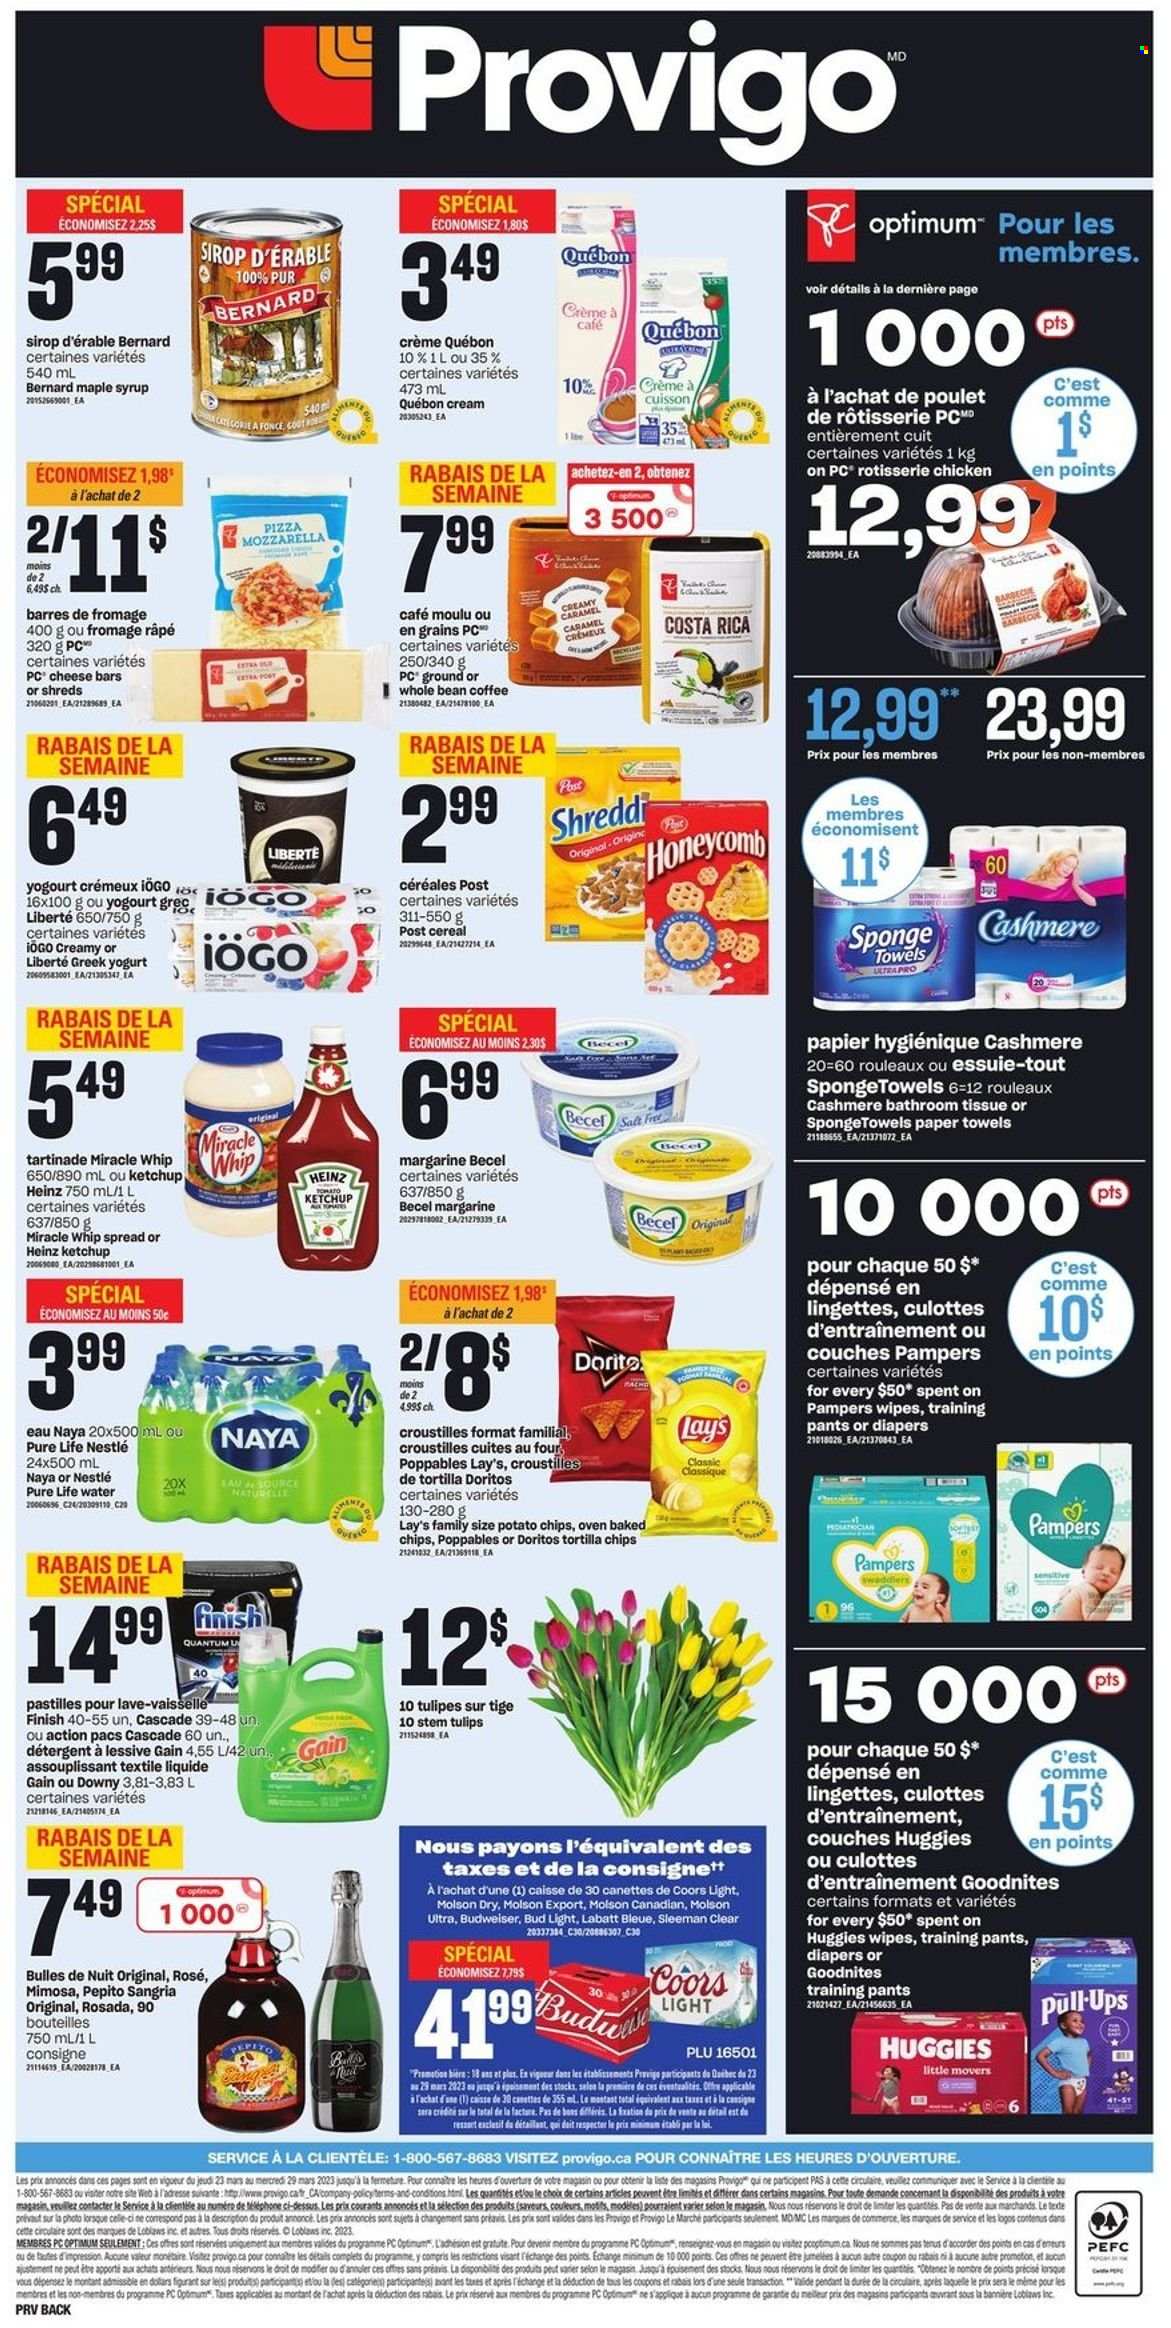 thumbnail - Provigo Flyer - March 23, 2023 - March 29, 2023 - Sales products - pizza, chicken roast, greek yoghurt, yoghurt, margarine, Miracle Whip, Mars, pastilles, Doritos, tortilla chips, potato chips, chips, Lay’s, salt, cereals, maple syrup, syrup, Pure Life Water, water, coffee, wine, rosé wine, beer, Bud Light, chicken, wipes, Pampers, pants, nappies, baby pants, bath tissue, kitchen towels, paper towels, Gain, Cascade, Finish Powerball, Finish Quantum Ultimate, Optimum, Budweiser, detergent, Nestlé, Heinz, Huggies, ketchup, Coors. Page 2.